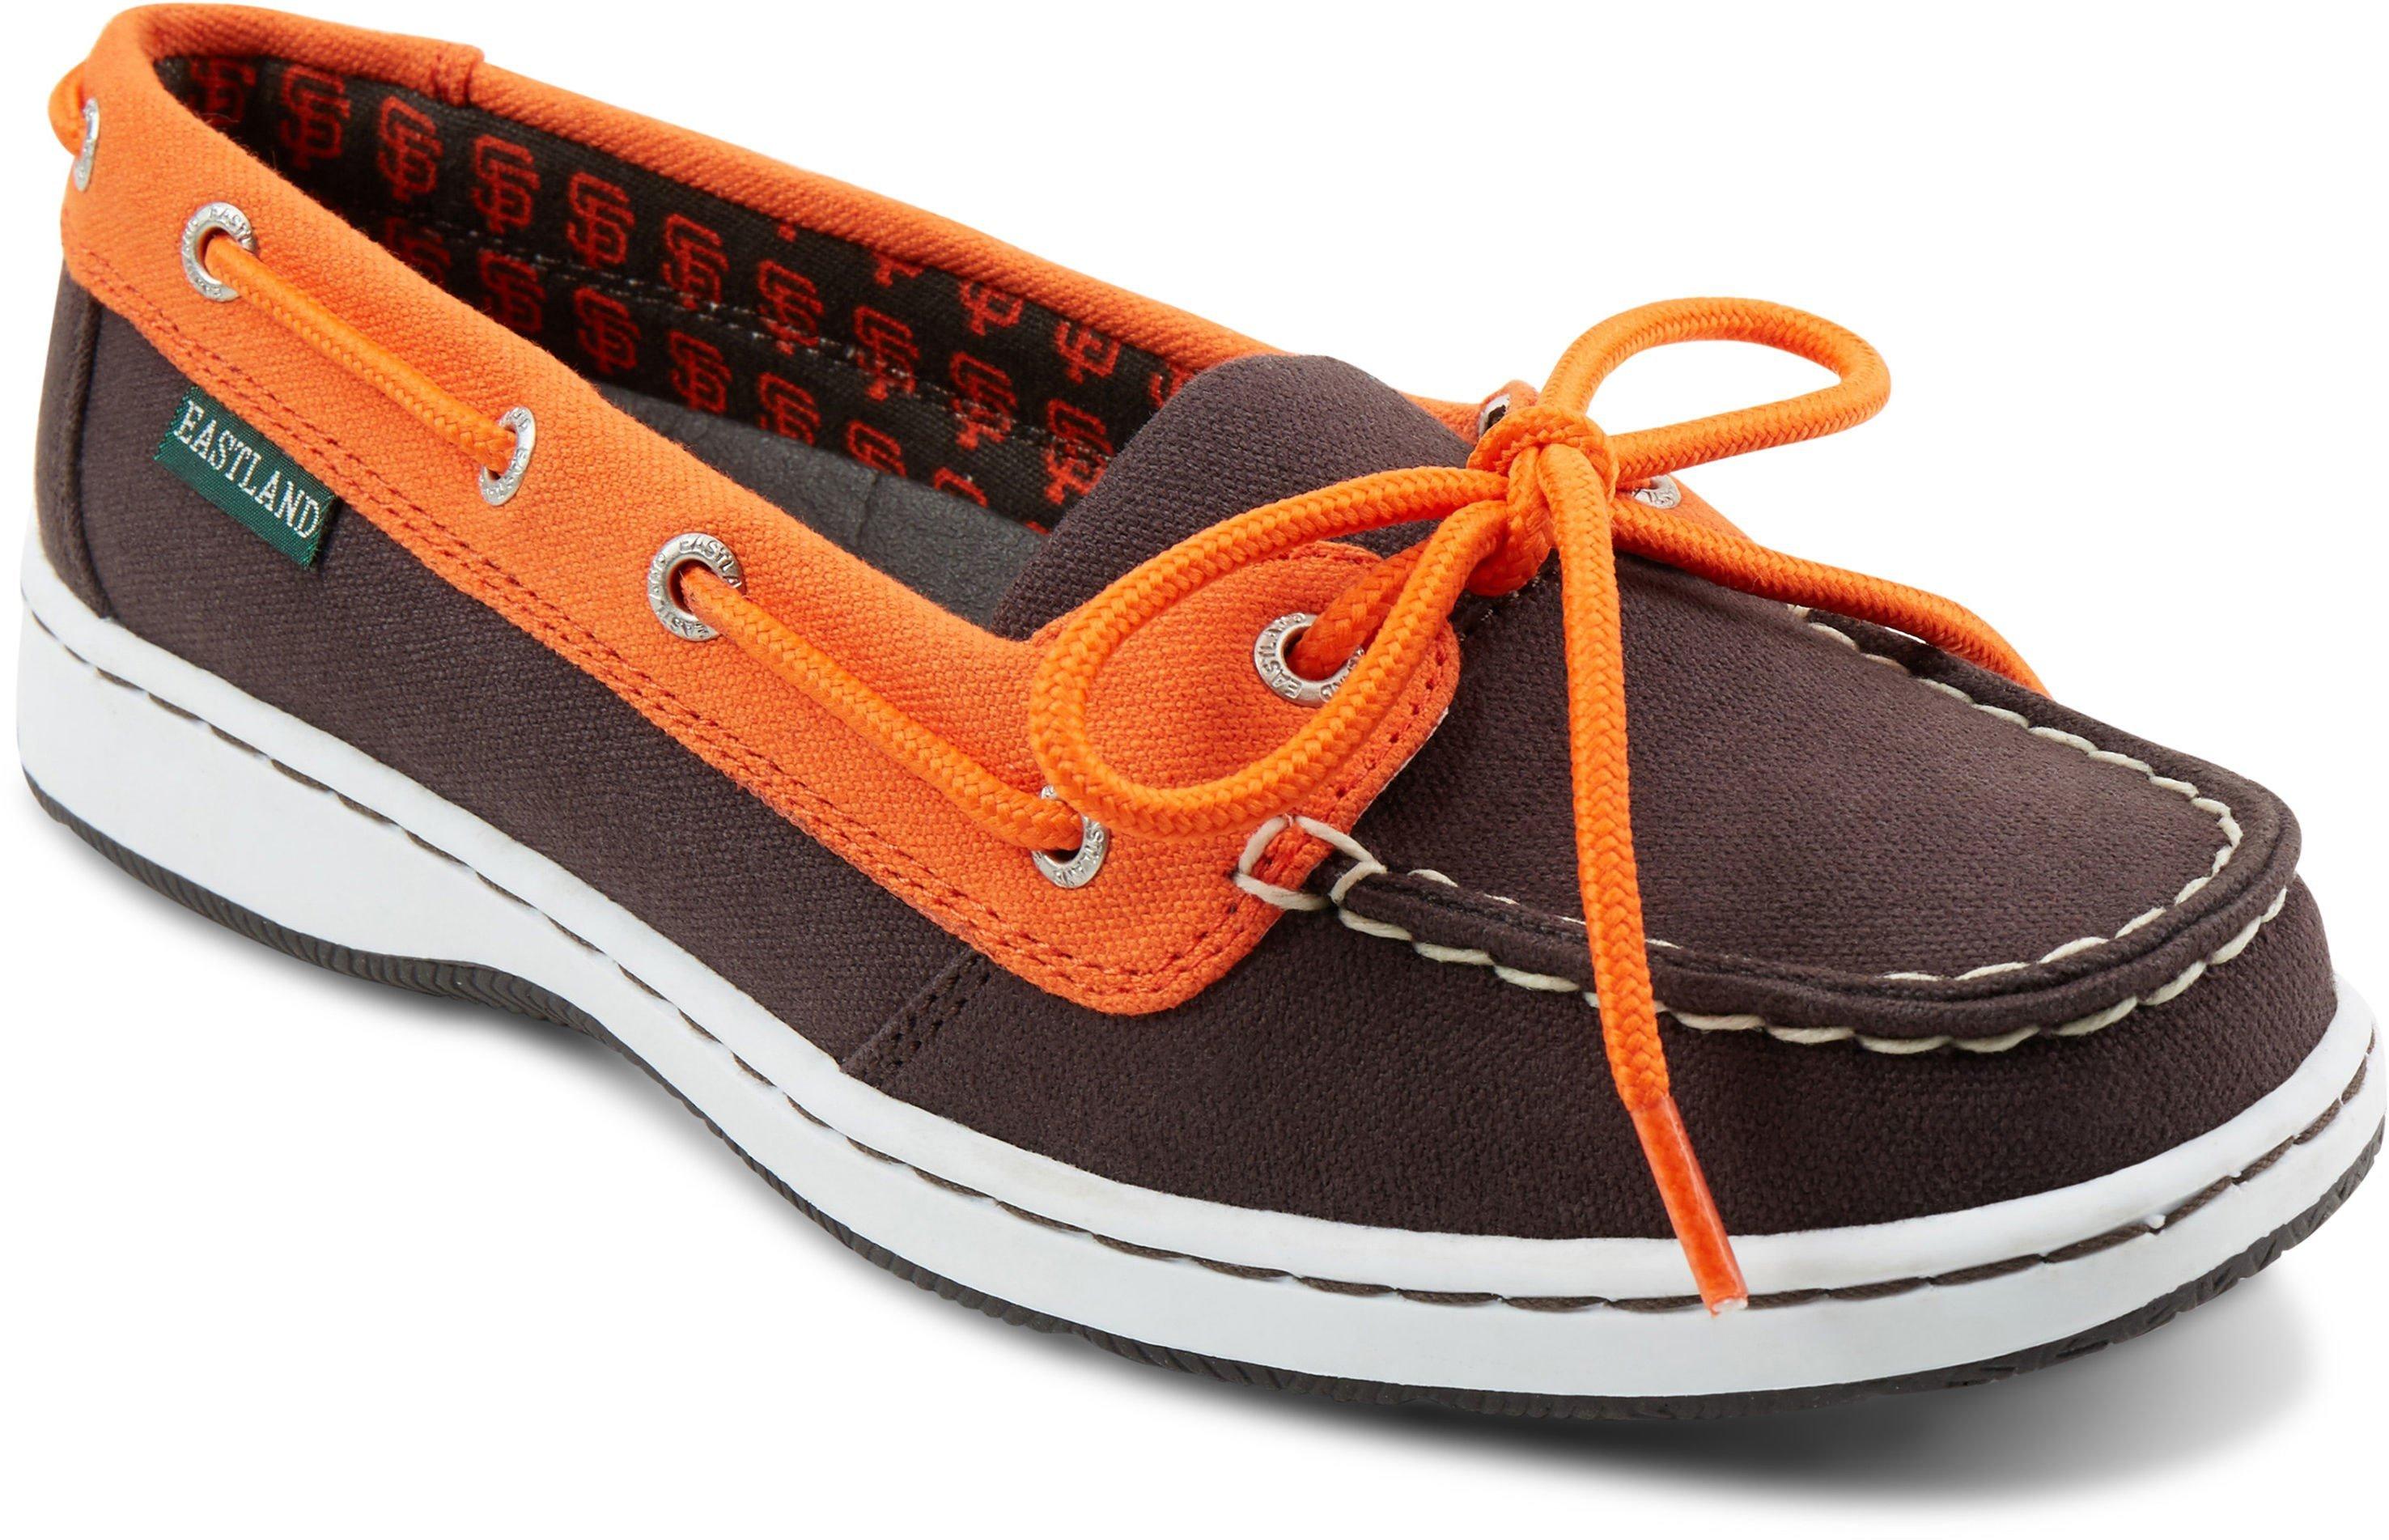 Reel Legends Womens boat shoes  Womens boat shoes, Boat shoes, Shoes